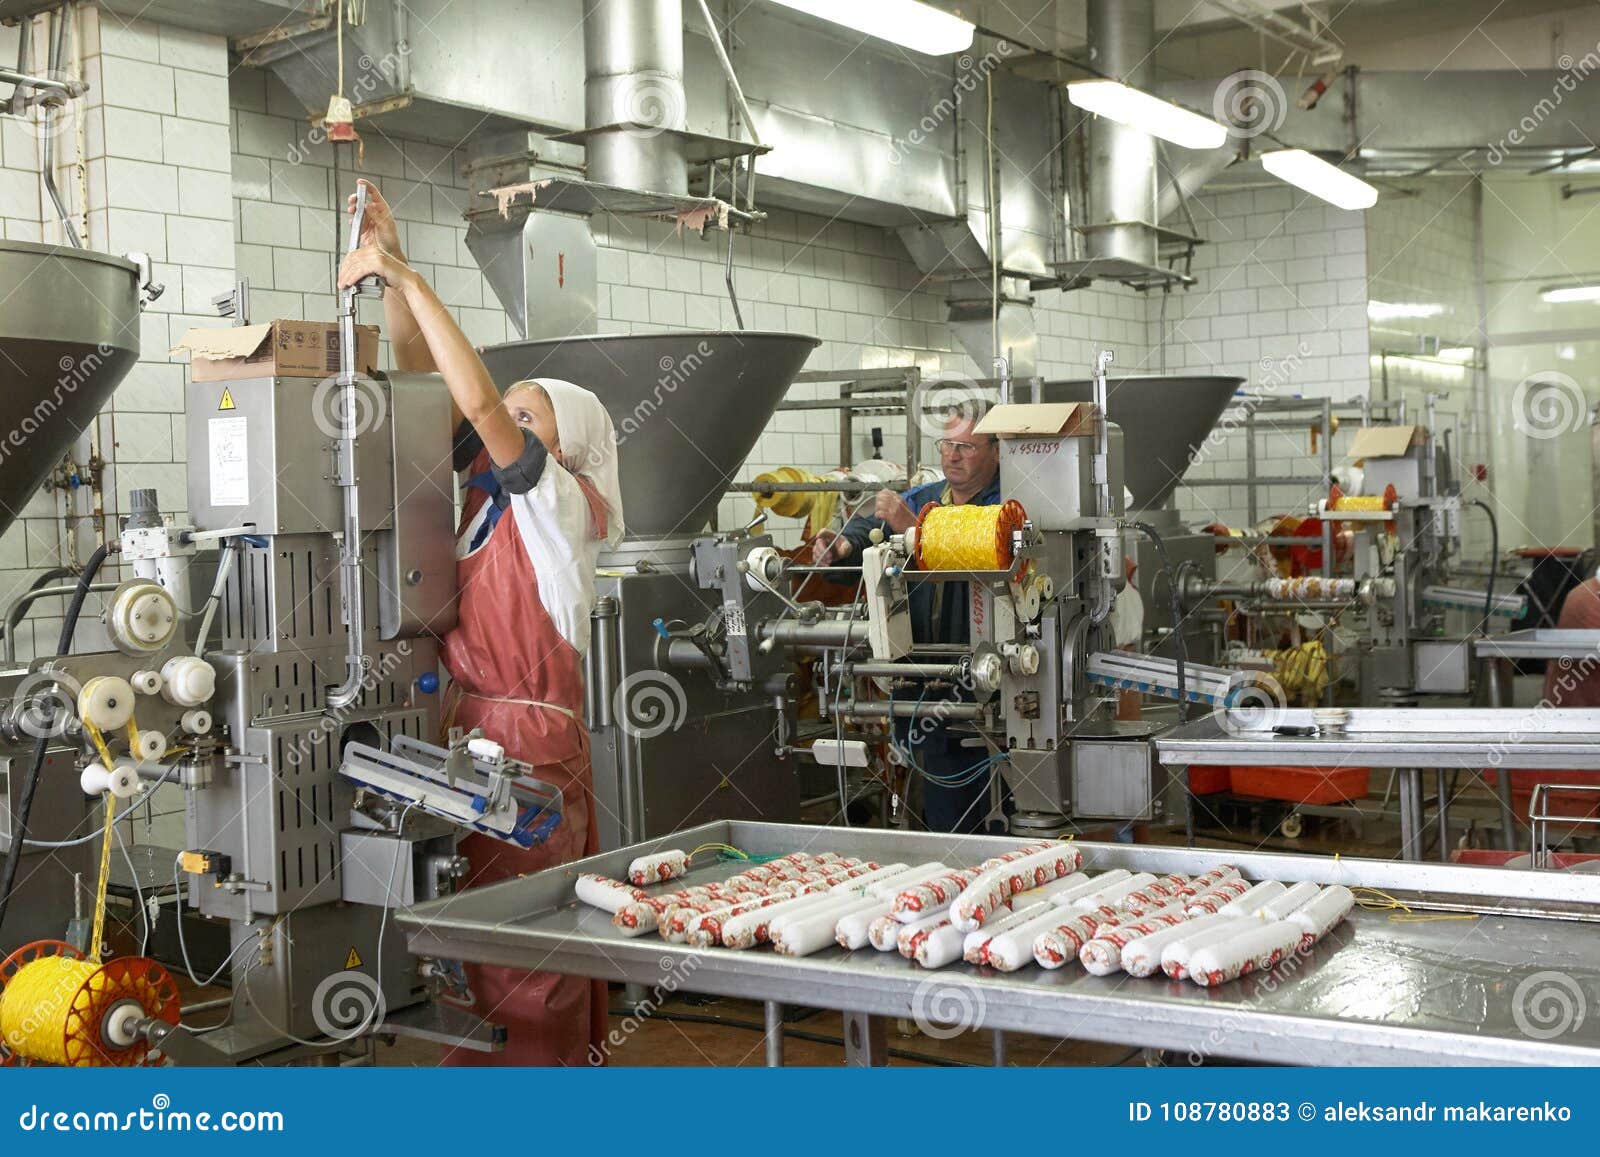 GOMEL, BELARUS - 22, 2011: the Meat Processing Plant. Processing of Pork and Beef. Machines, Mechanisms and Equipment. Editorial Stock Photo Image of fresh, industrial: 108780883